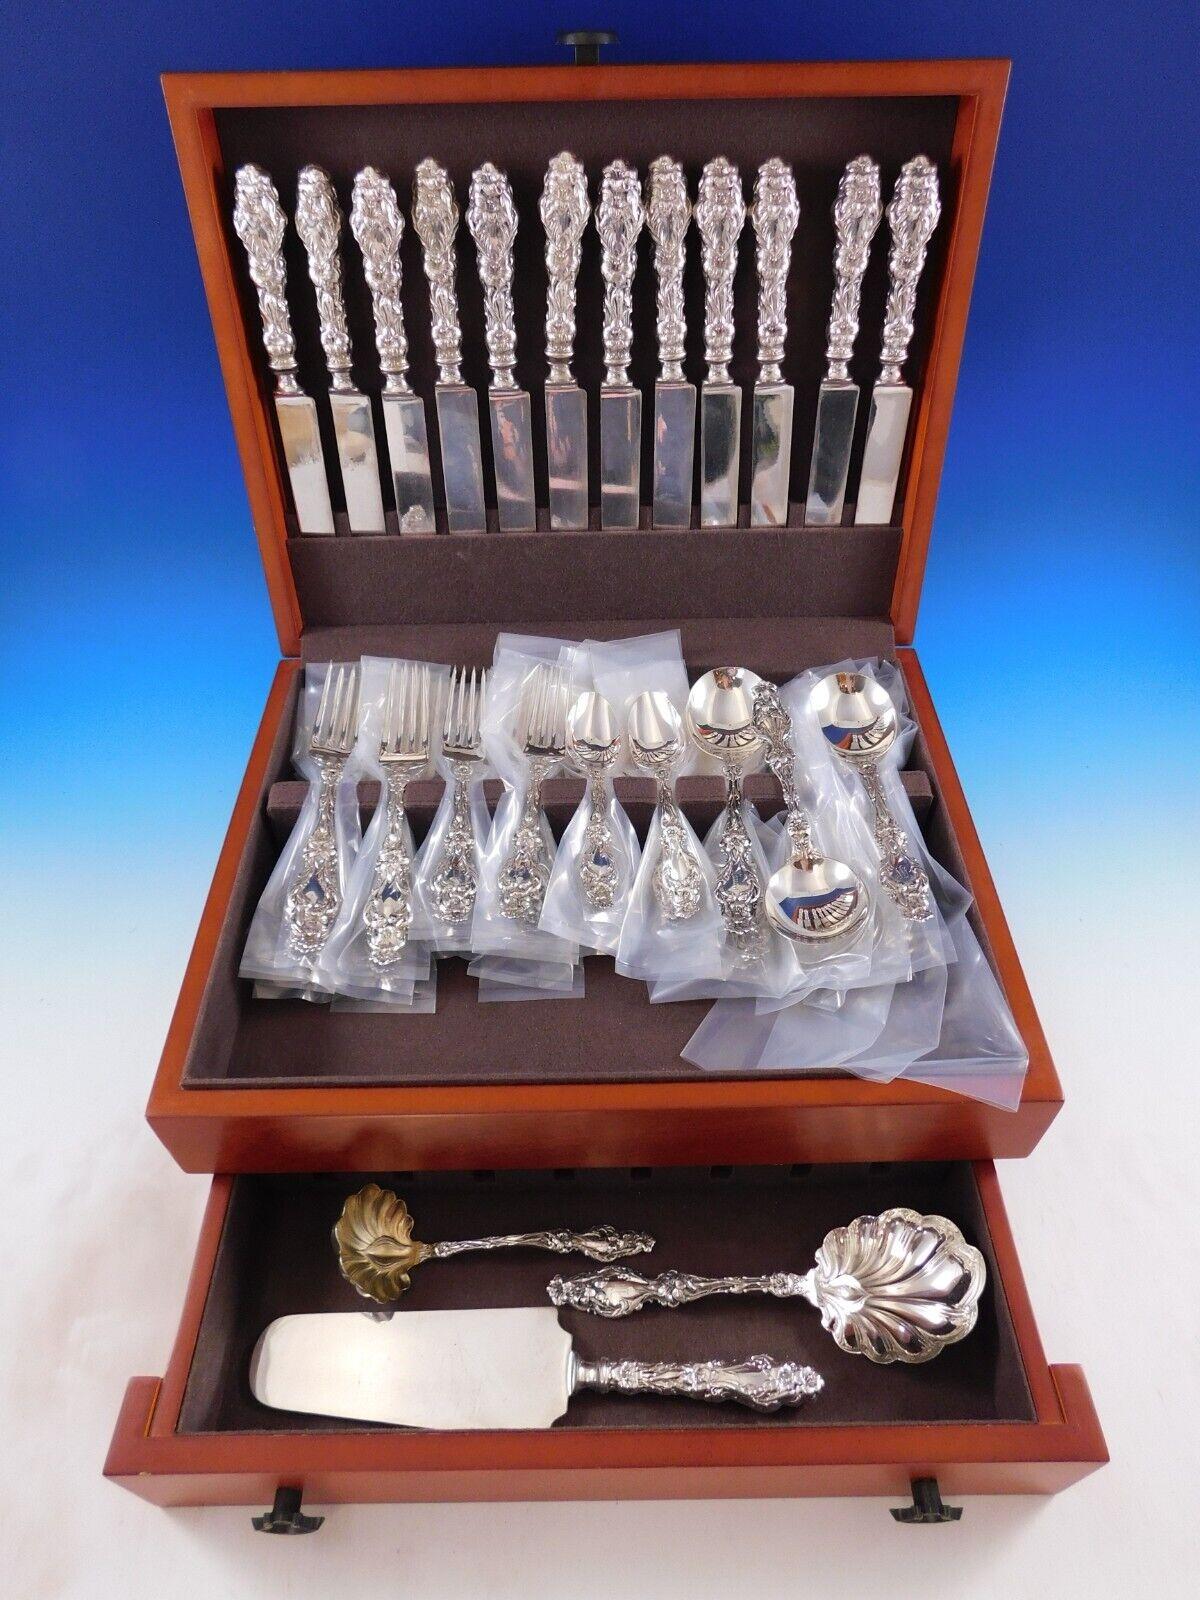 Dinner Size Lily by Whiting Sterling Silver Flatware set - 64 pieces. This set includes:

12 Dinner Size Knives with fabulous early hand cast handles and Blunt plated blades, 9 3/4